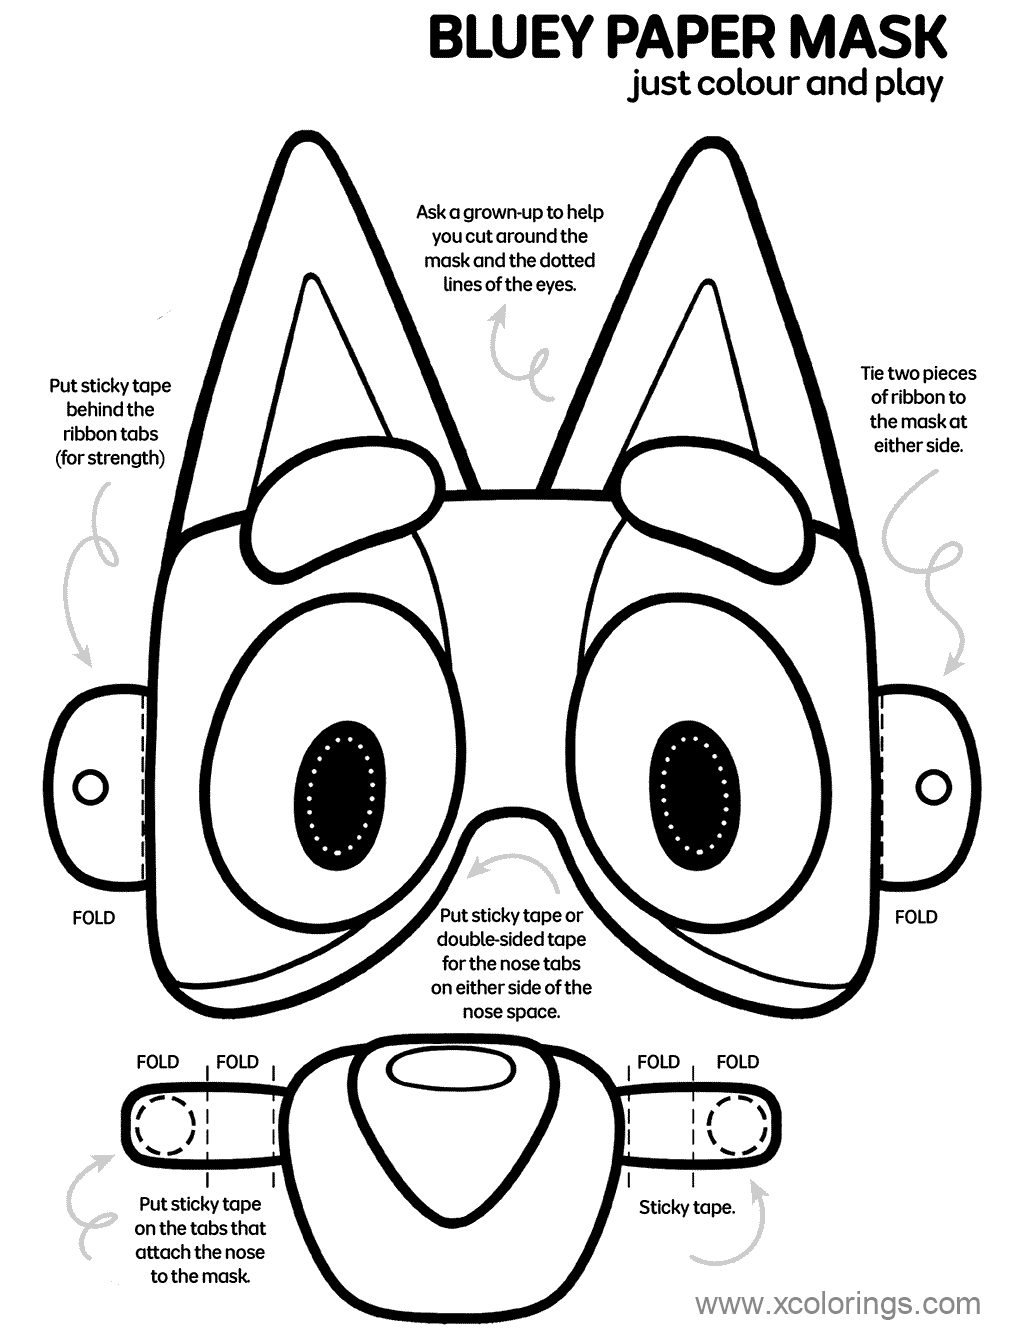 Bluey Mask Craft Coloring Pages